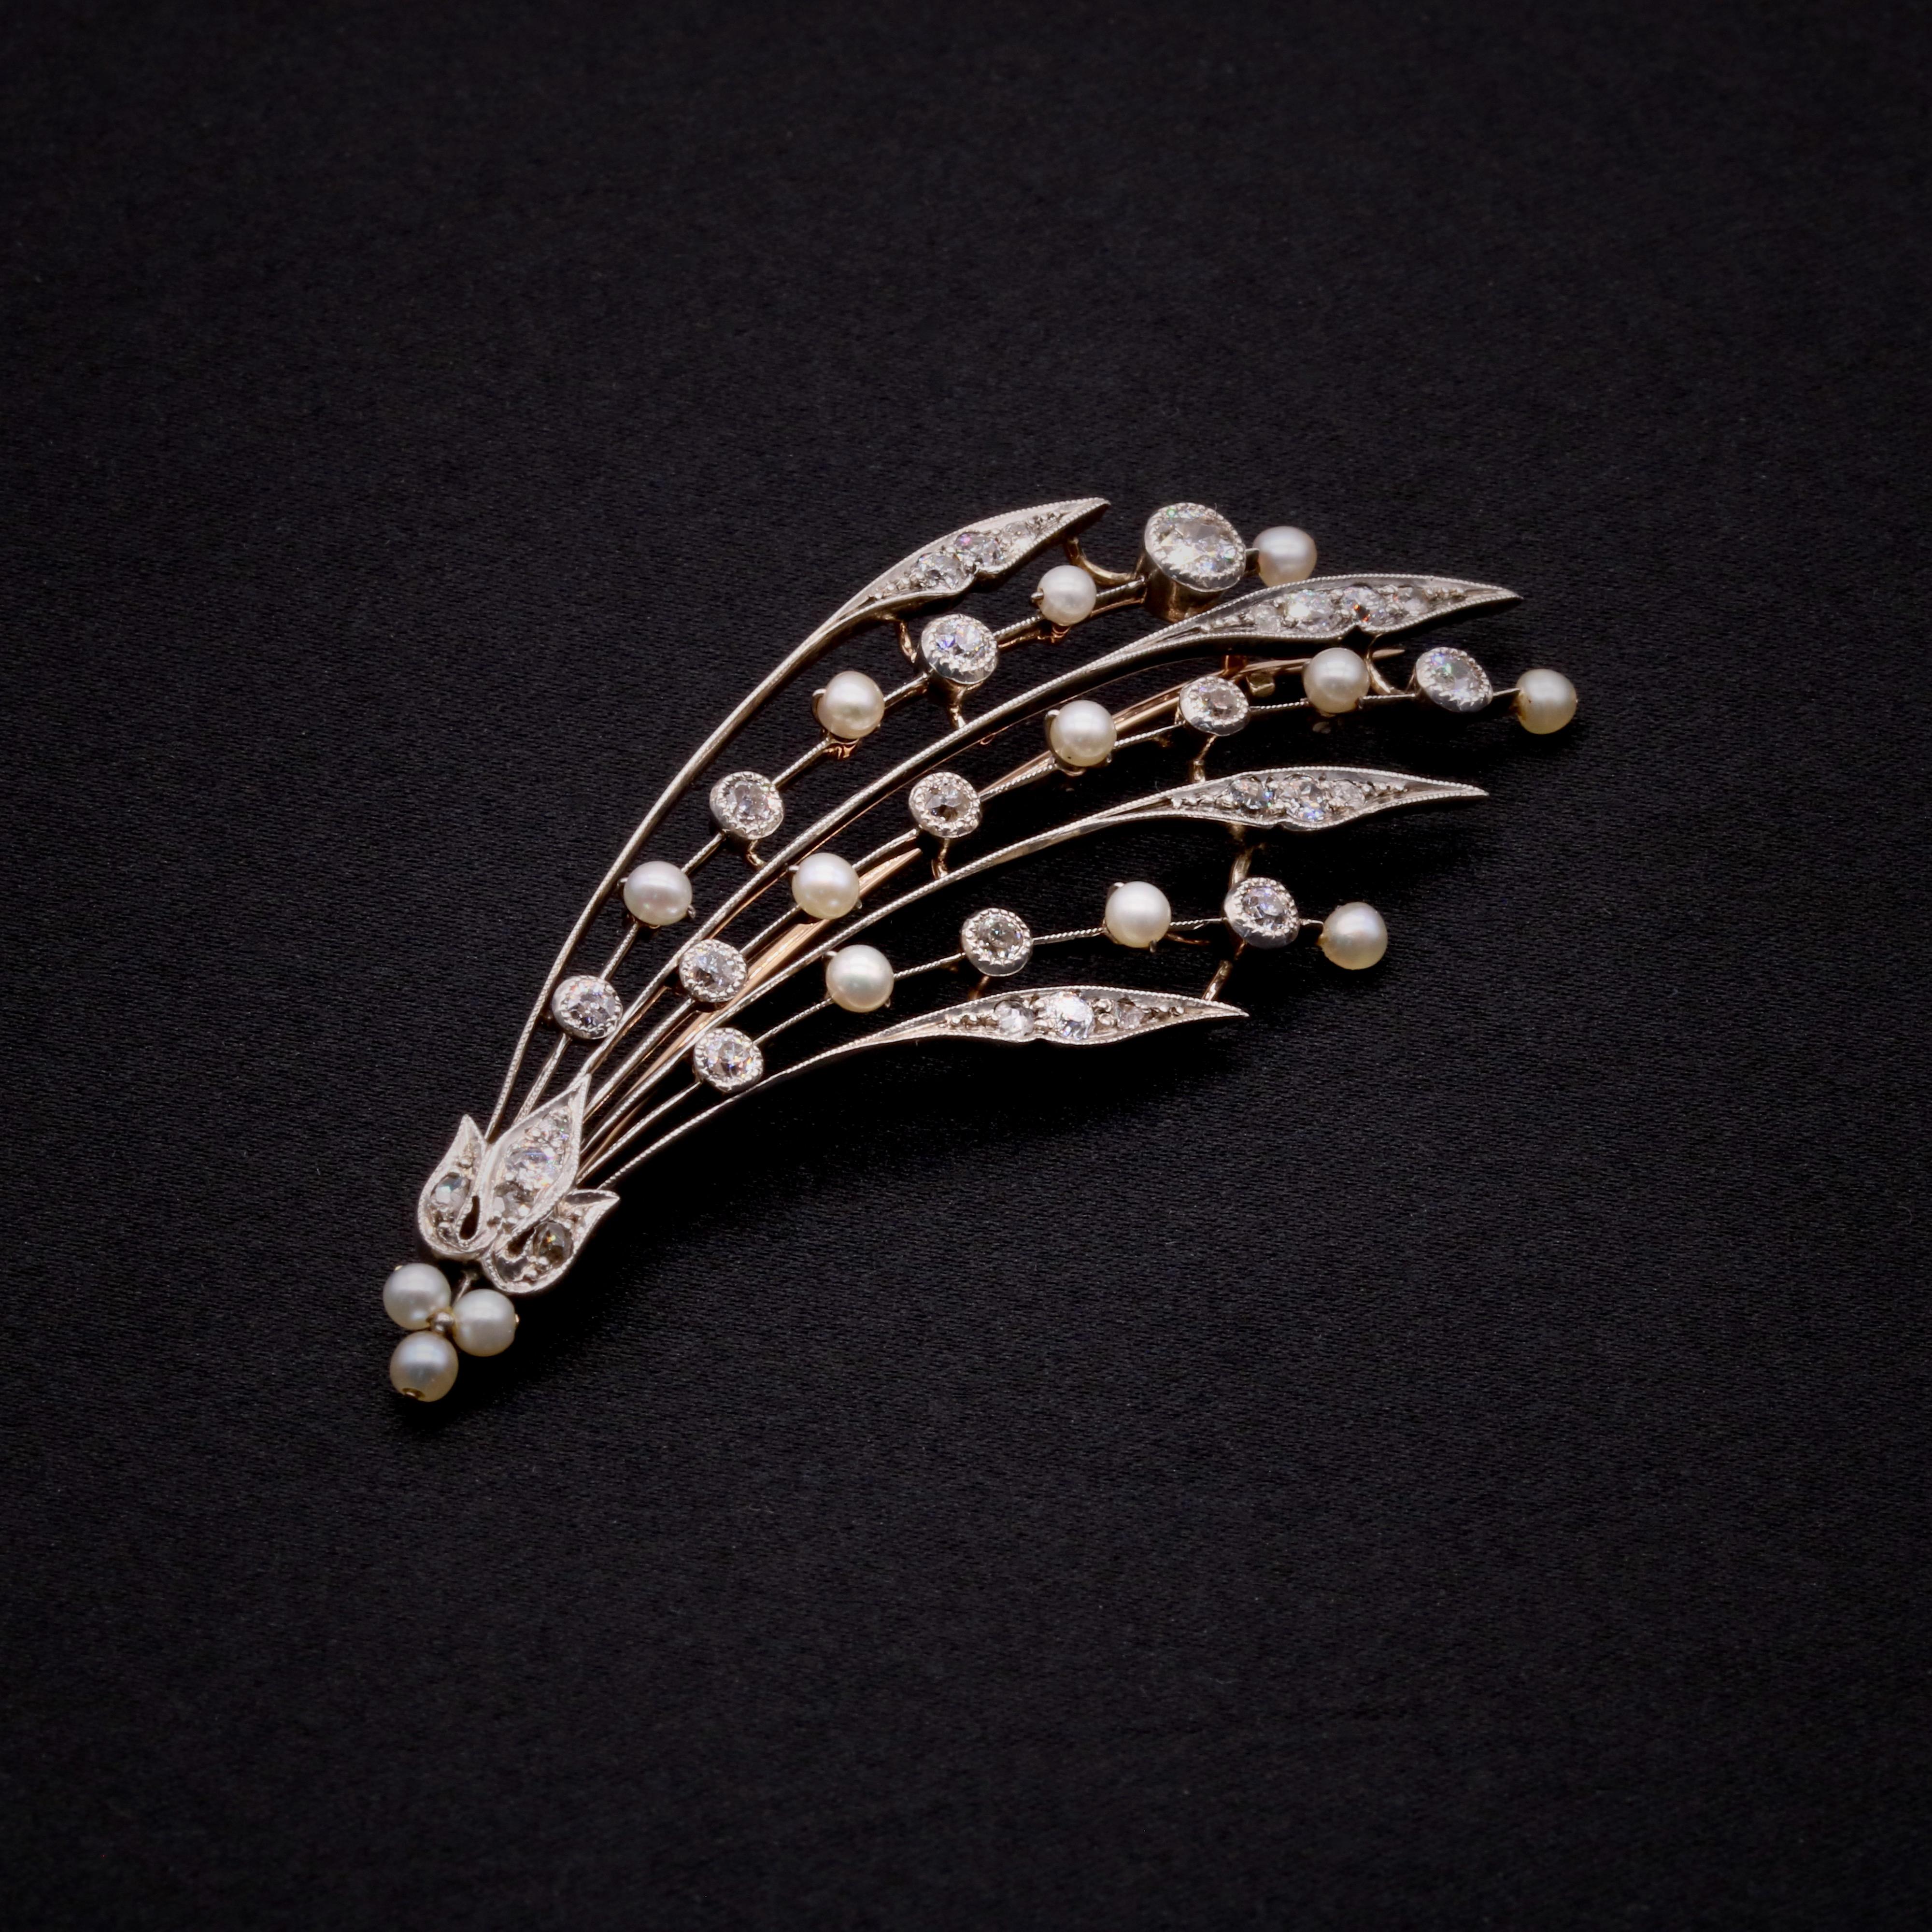 An Edwardian diamond, pearl, silver, and yellow gold brooch, comprising twenty-two old European cut diamonds, six rose cut diamonds, and fourteen seed pearls, set in silver, backed in 15 karat yellow gold, with 15 karat yellow gold pin and fittings.